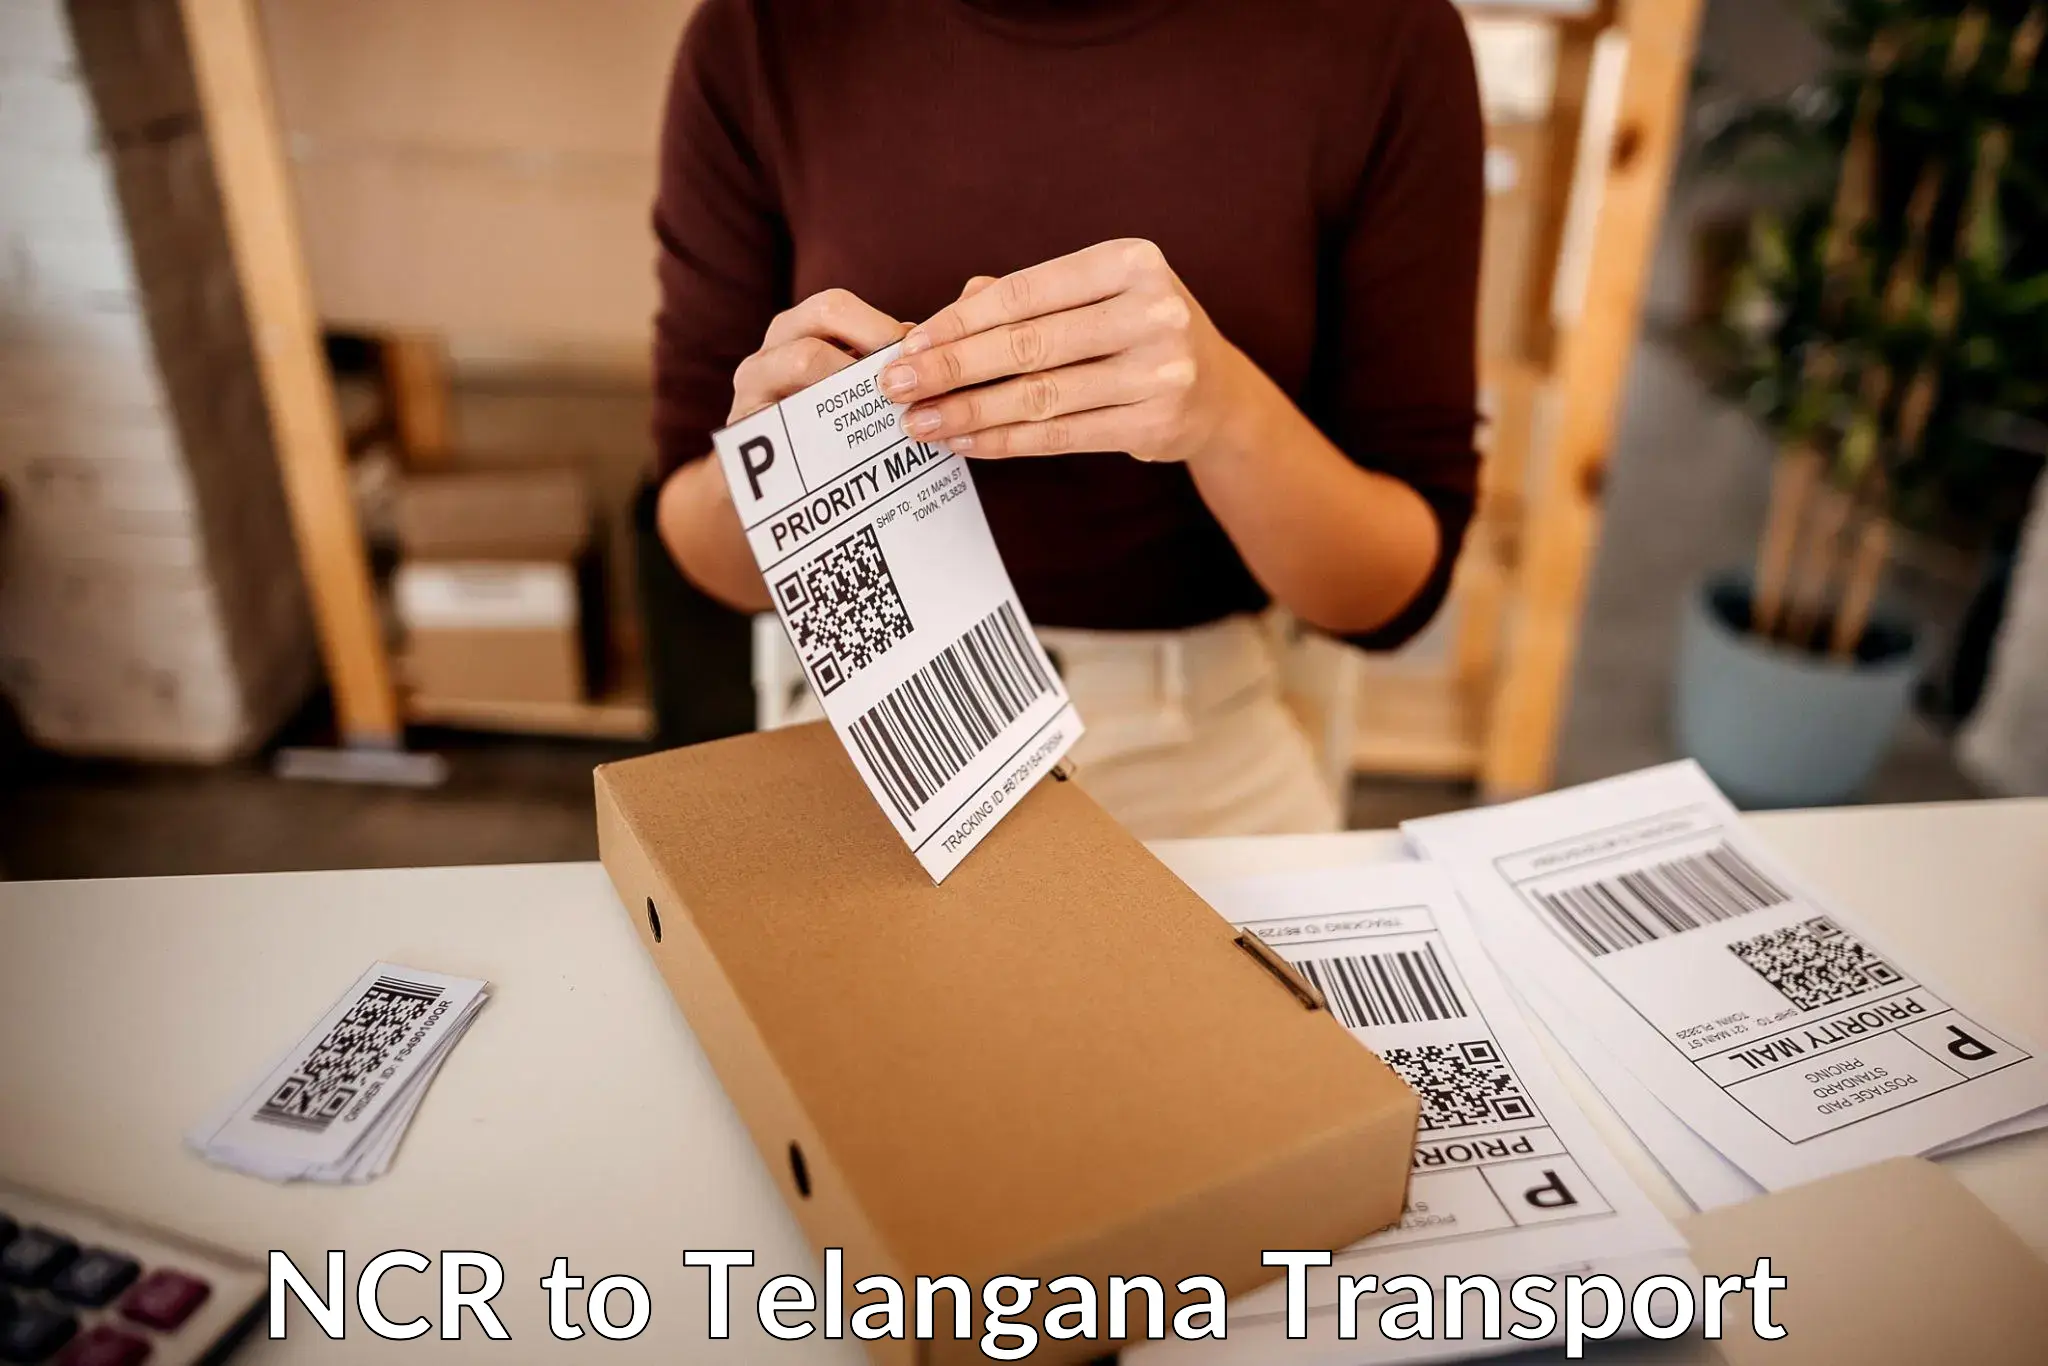 Container transport service NCR to Bejjanki